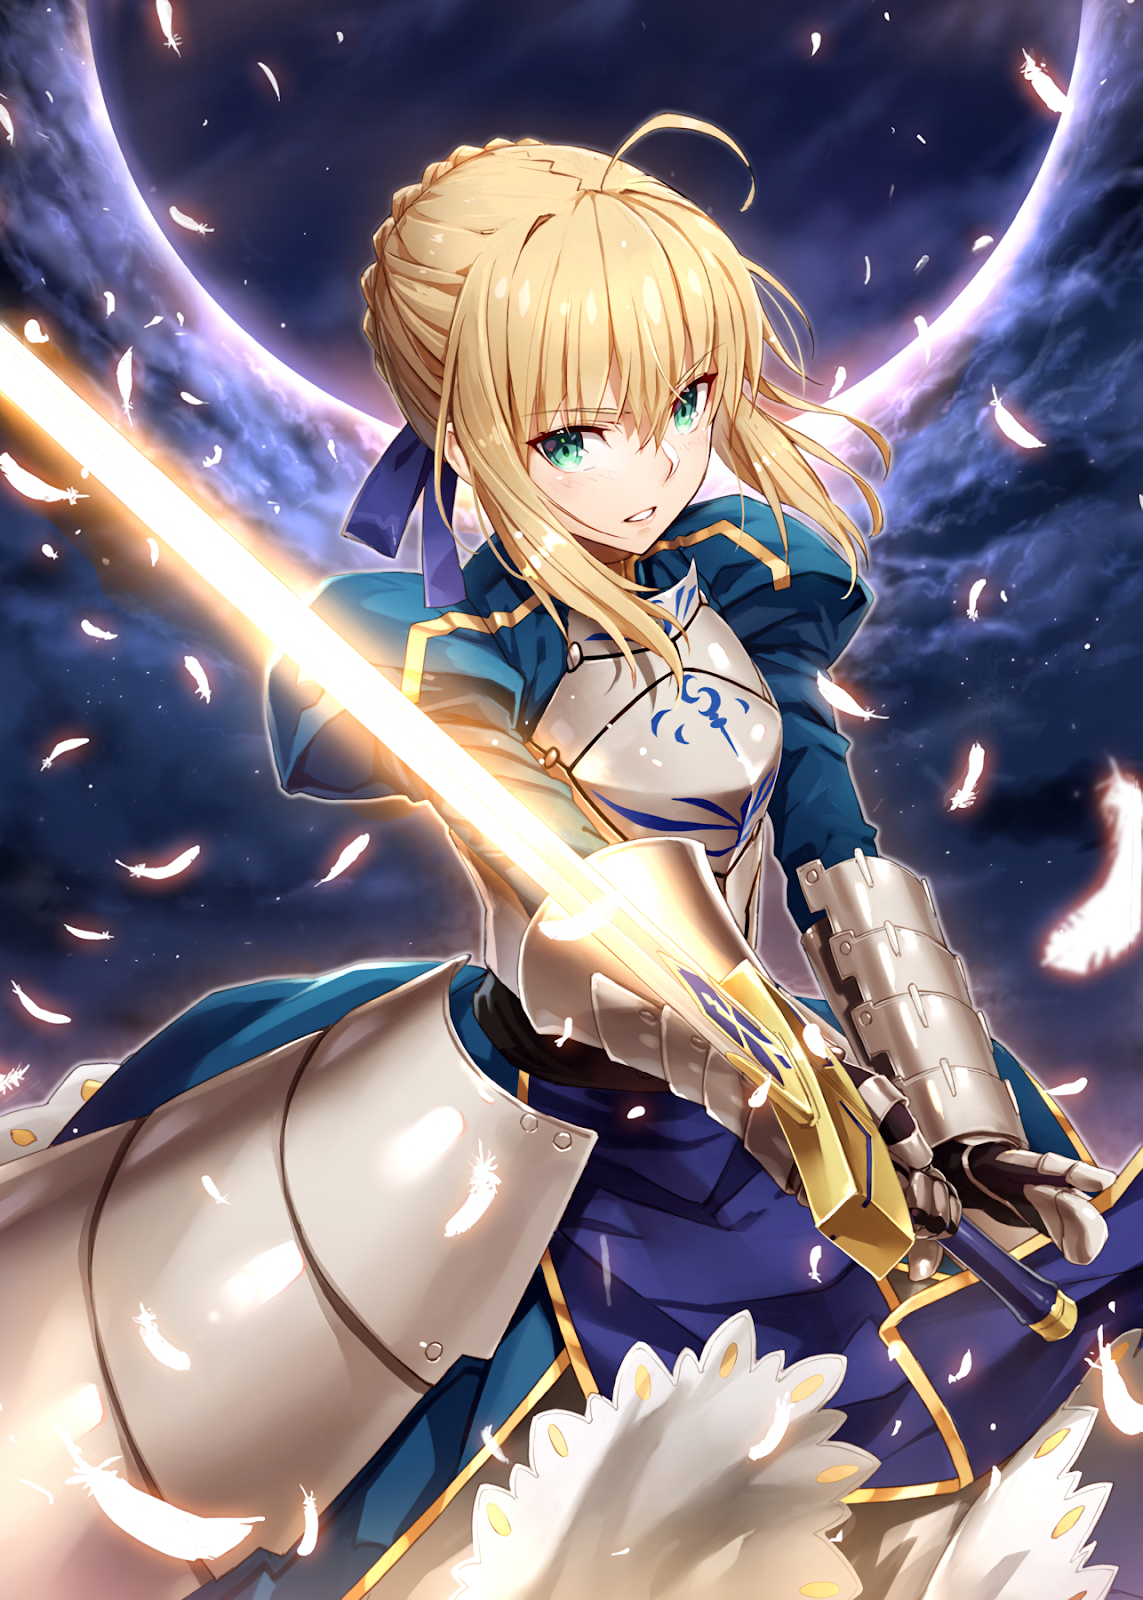 The Popular Fate Anime Series – Fan Favorite Characters and Stories!